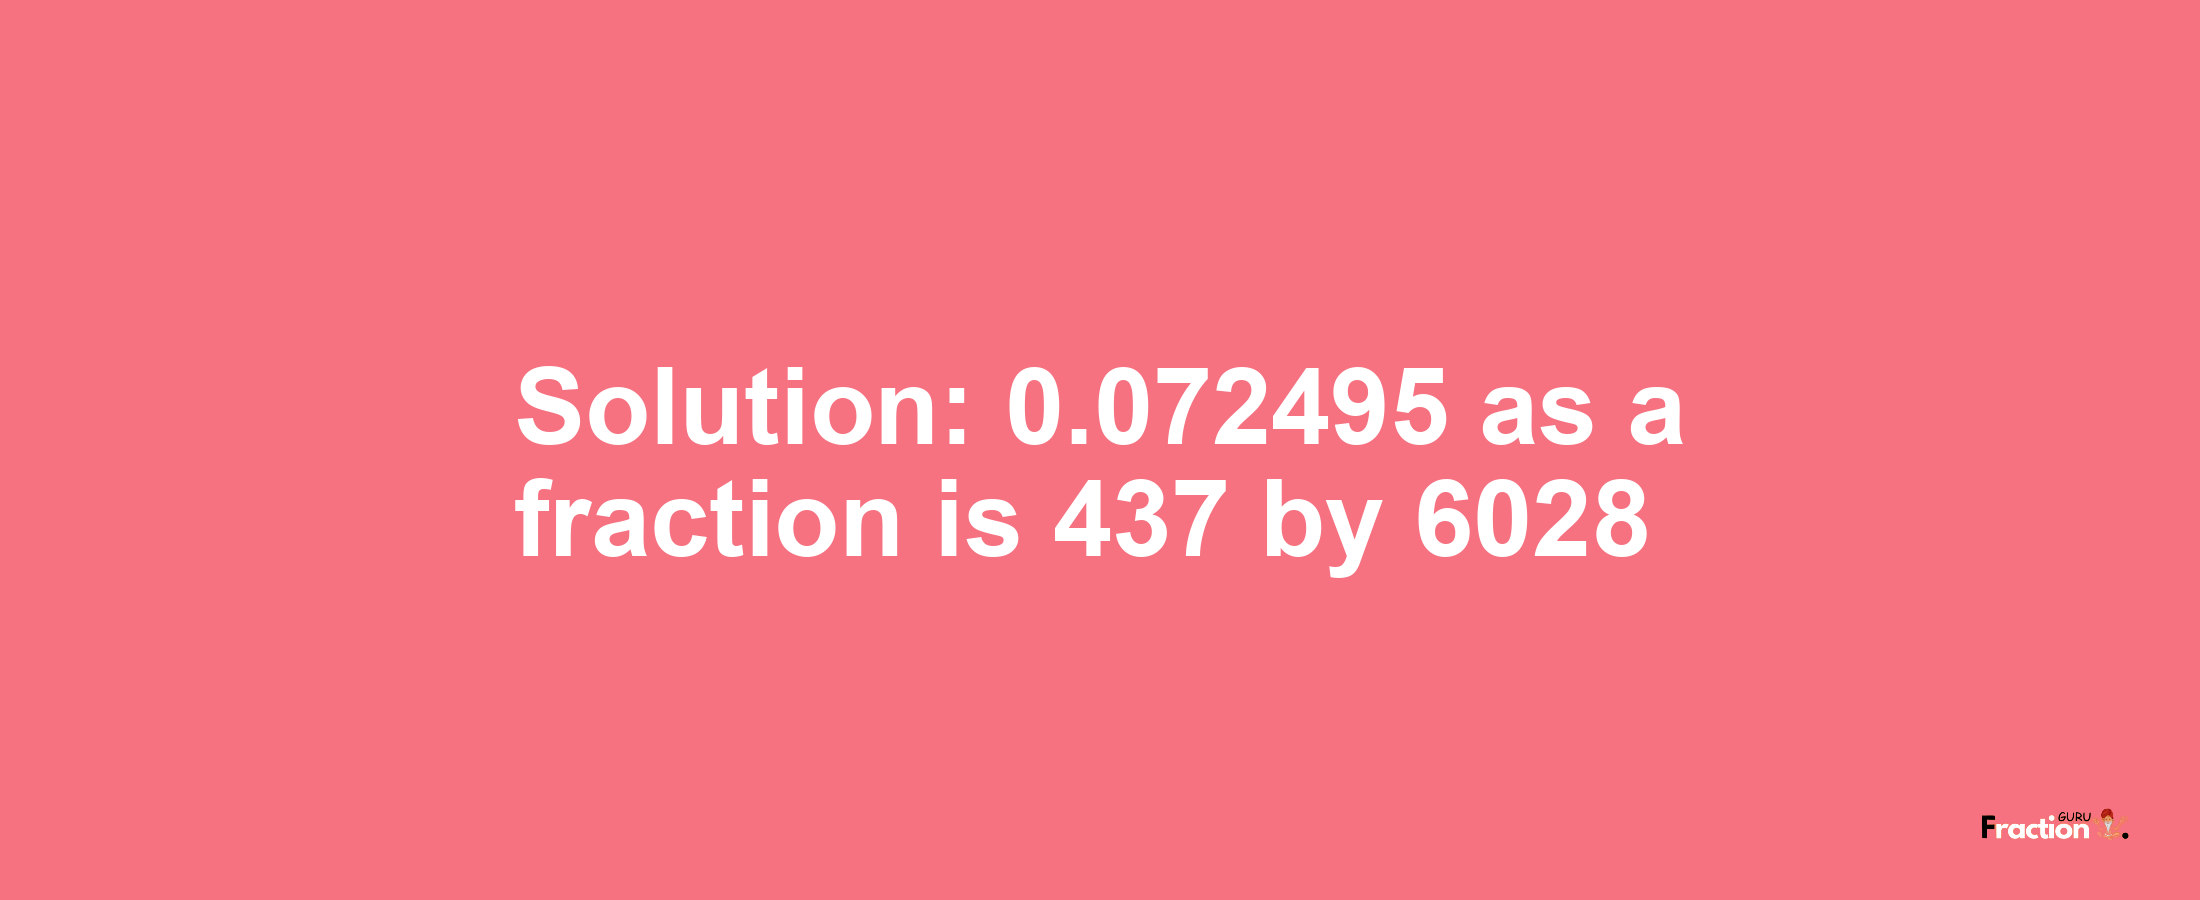 Solution:0.072495 as a fraction is 437/6028